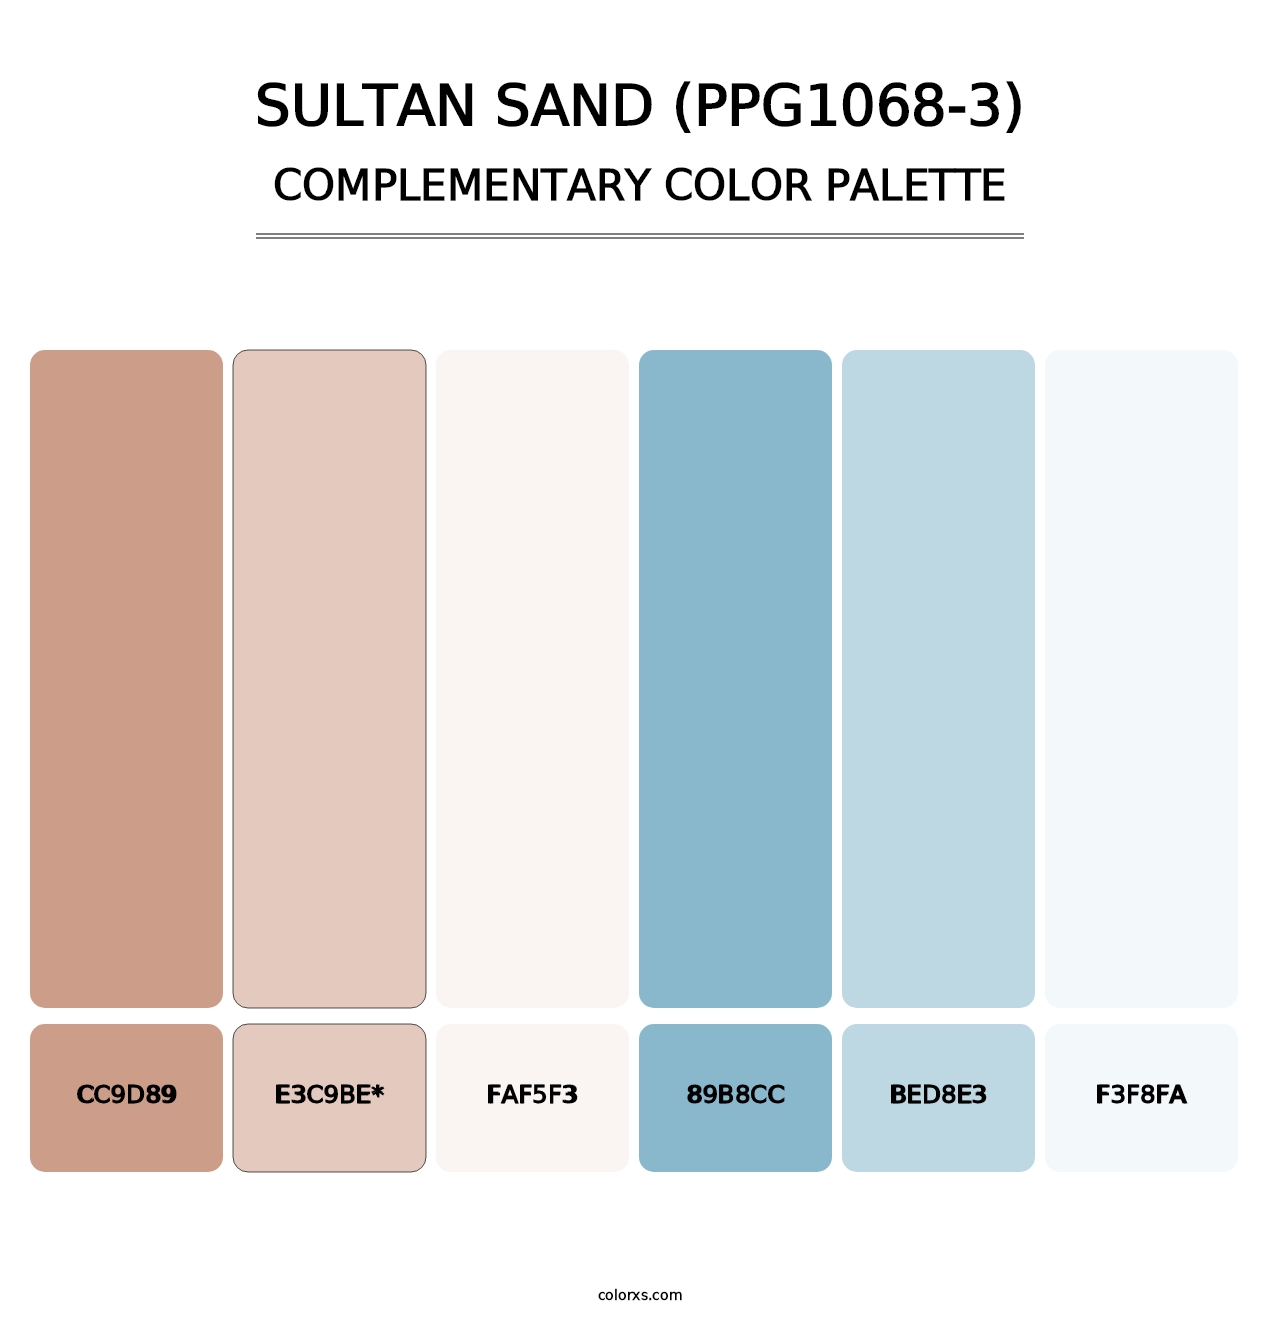 Sultan Sand (PPG1068-3) - Complementary Color Palette